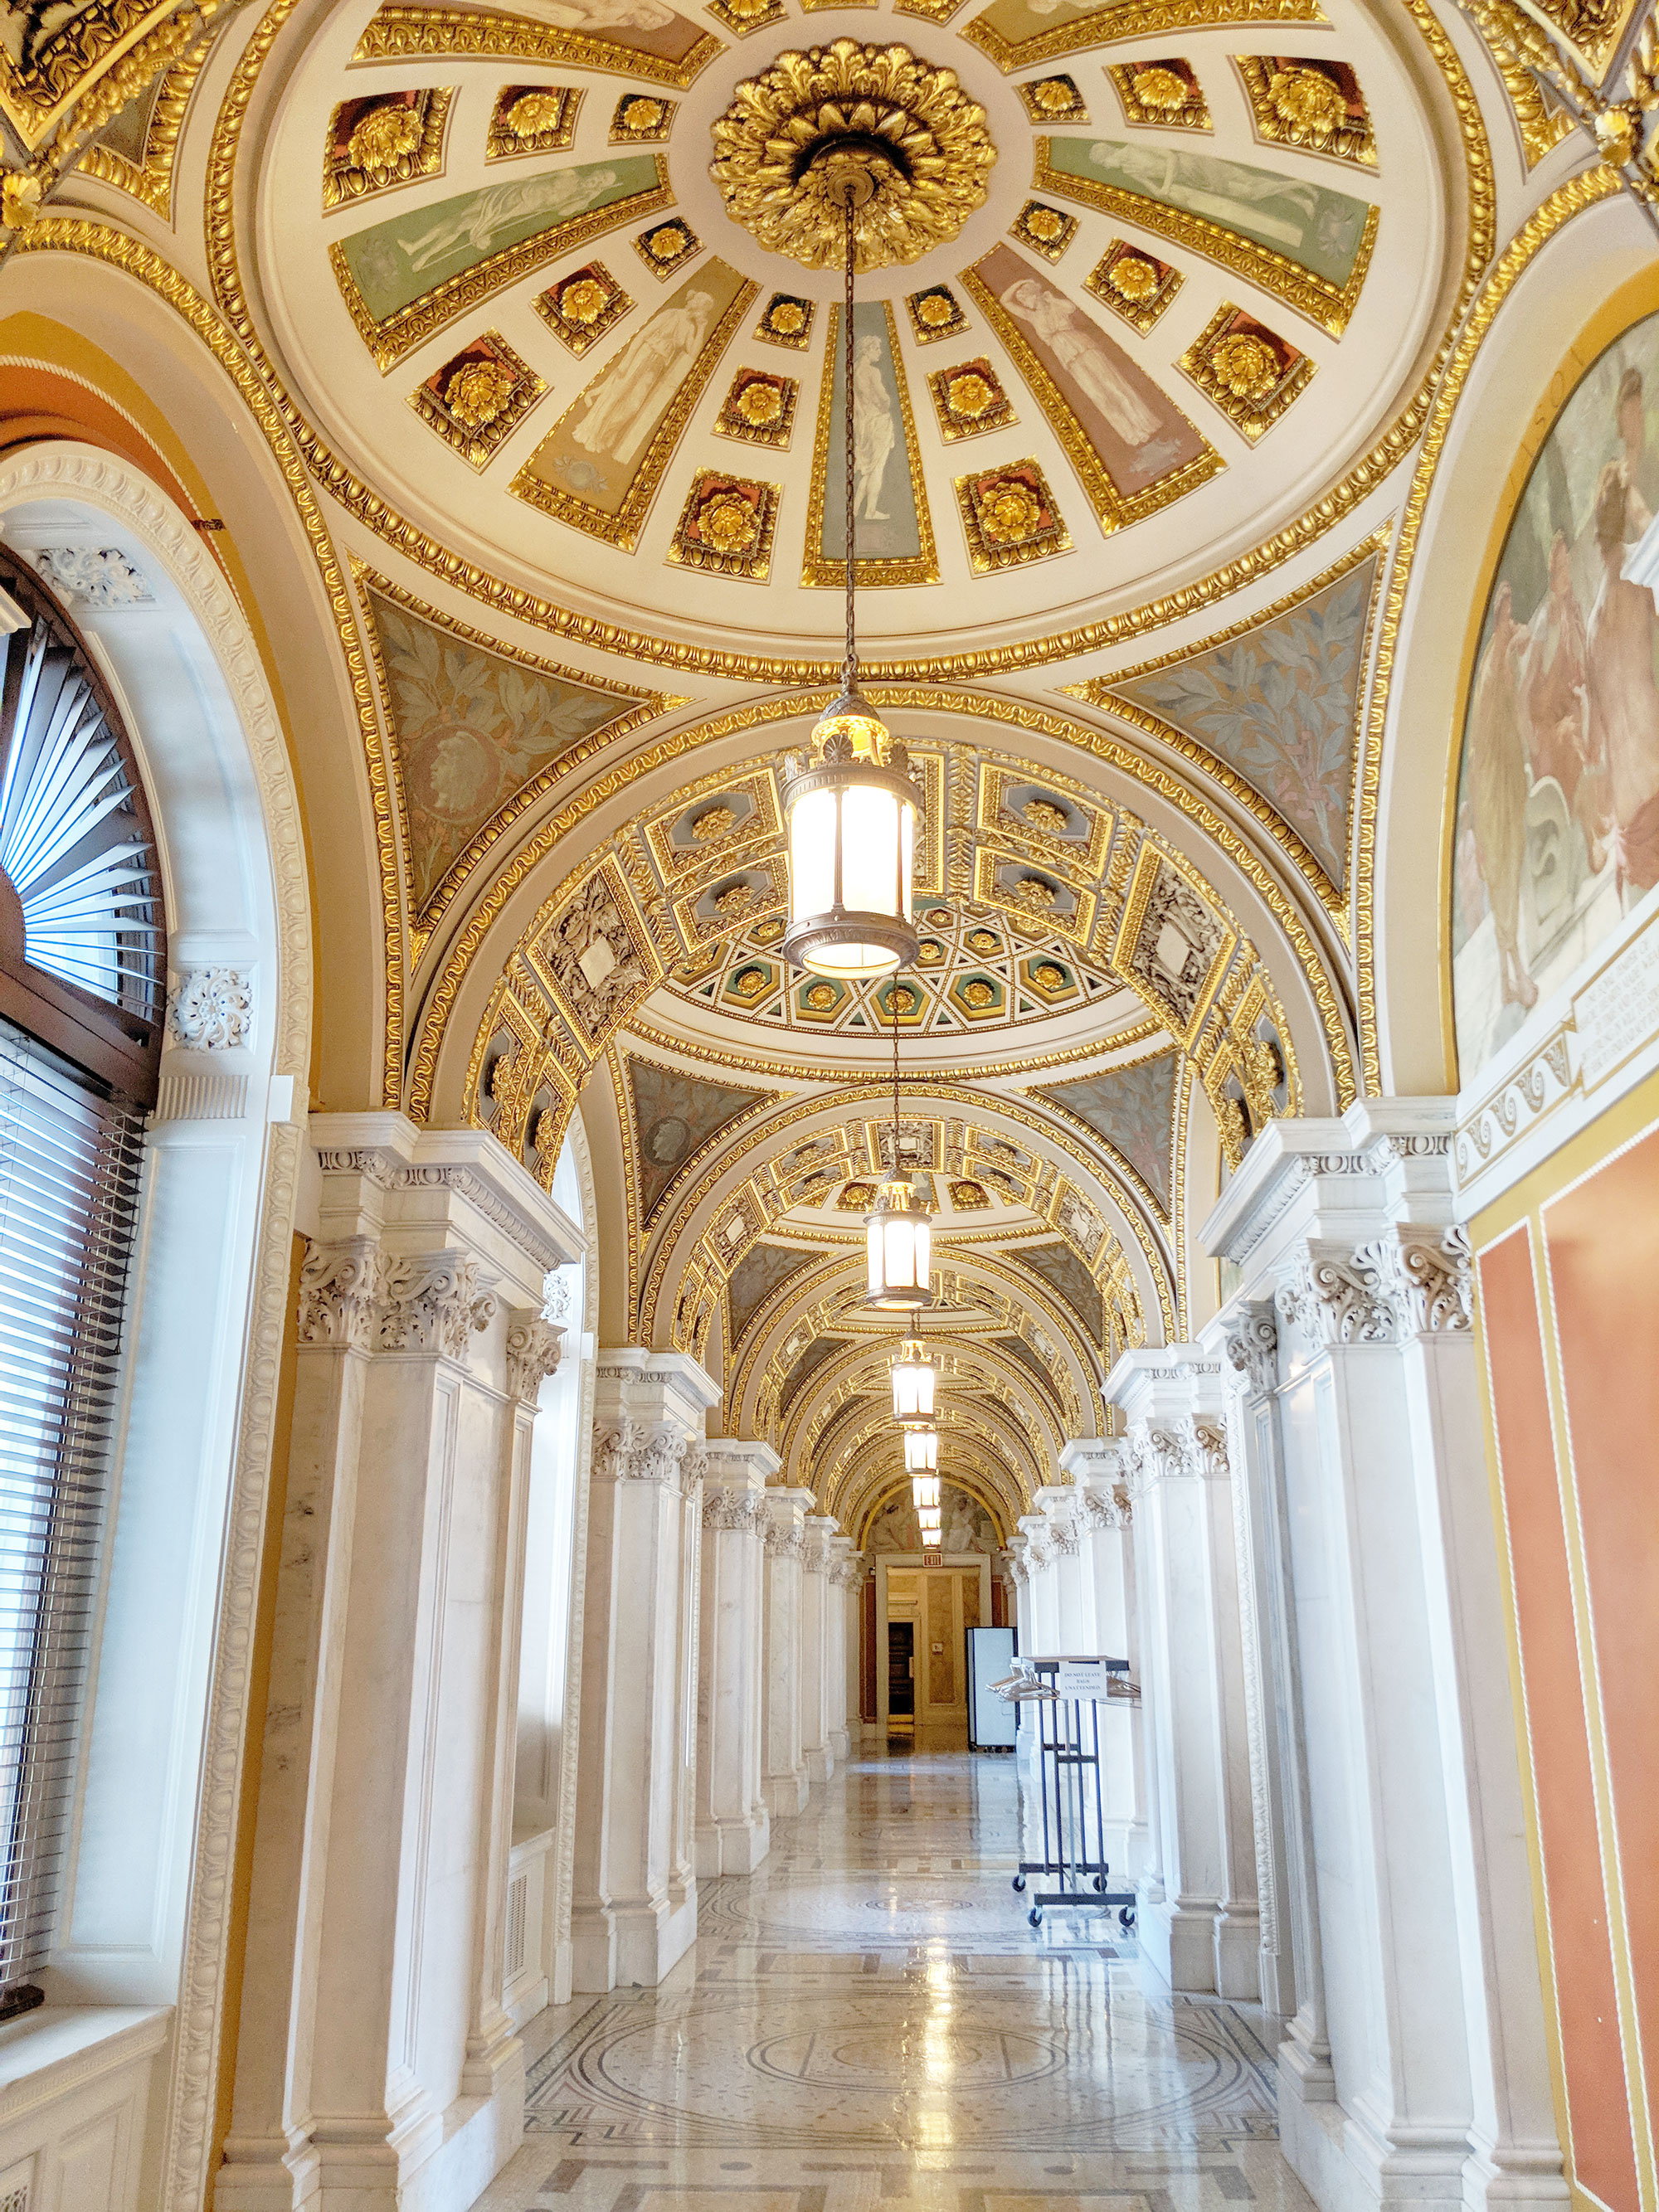 A hallway in the Library of Congress.